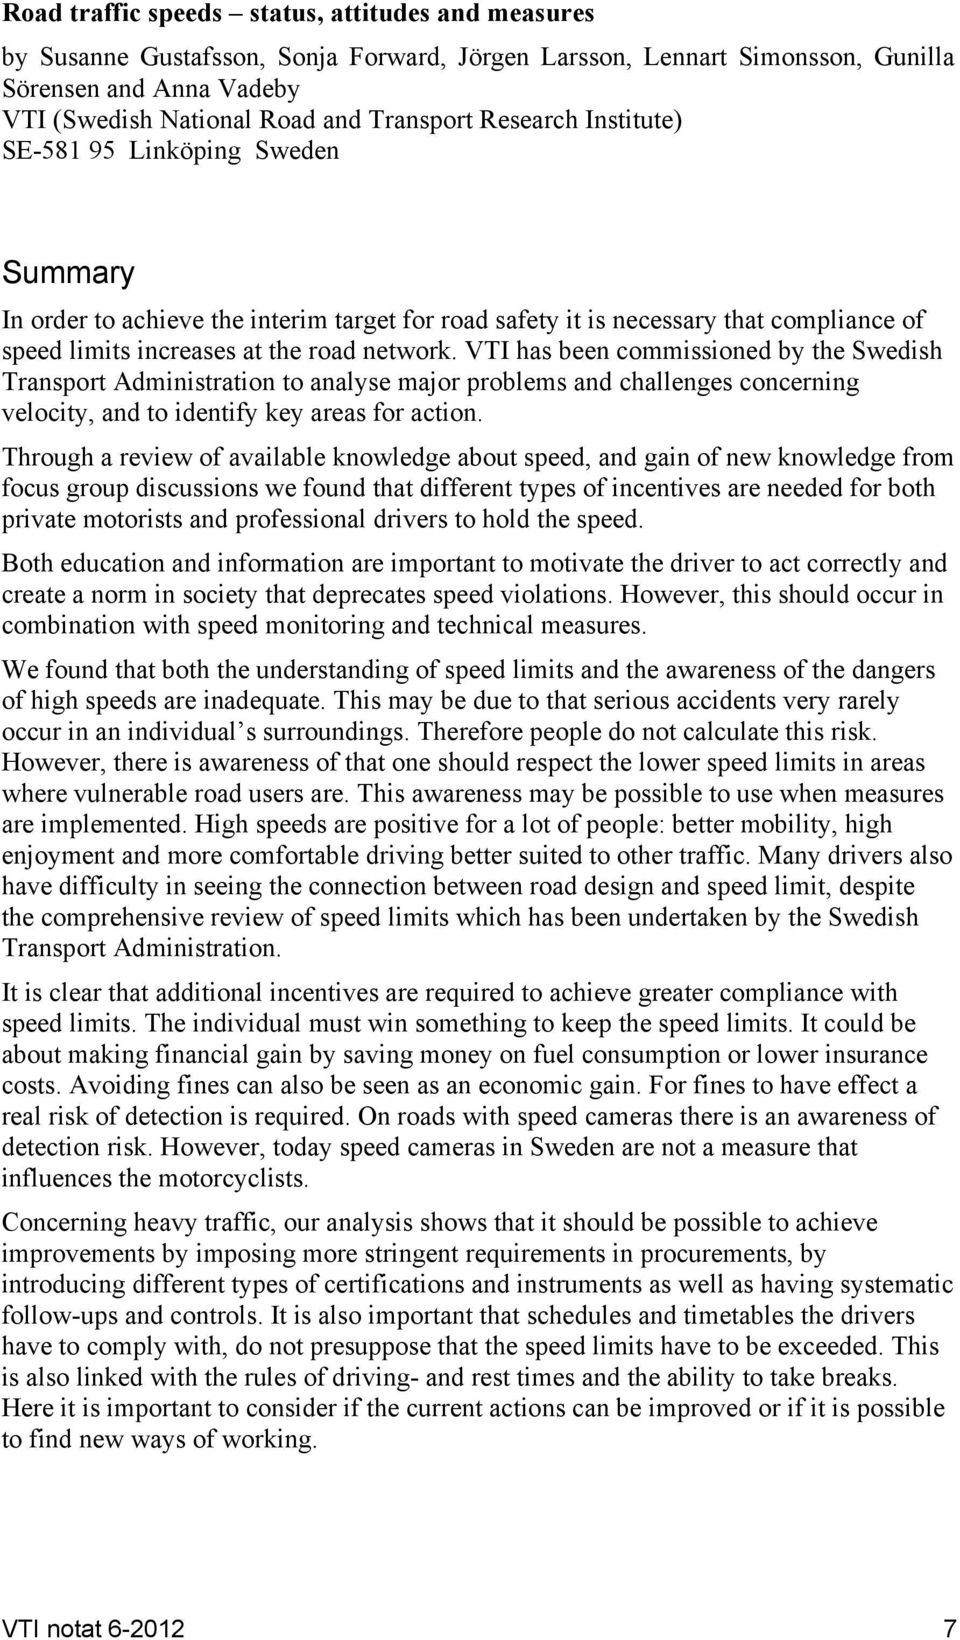 VTI has been commissioned by the Swedish Transport Administration to analyse major problems and challenges concerning velocity, and to identify key areas for action.